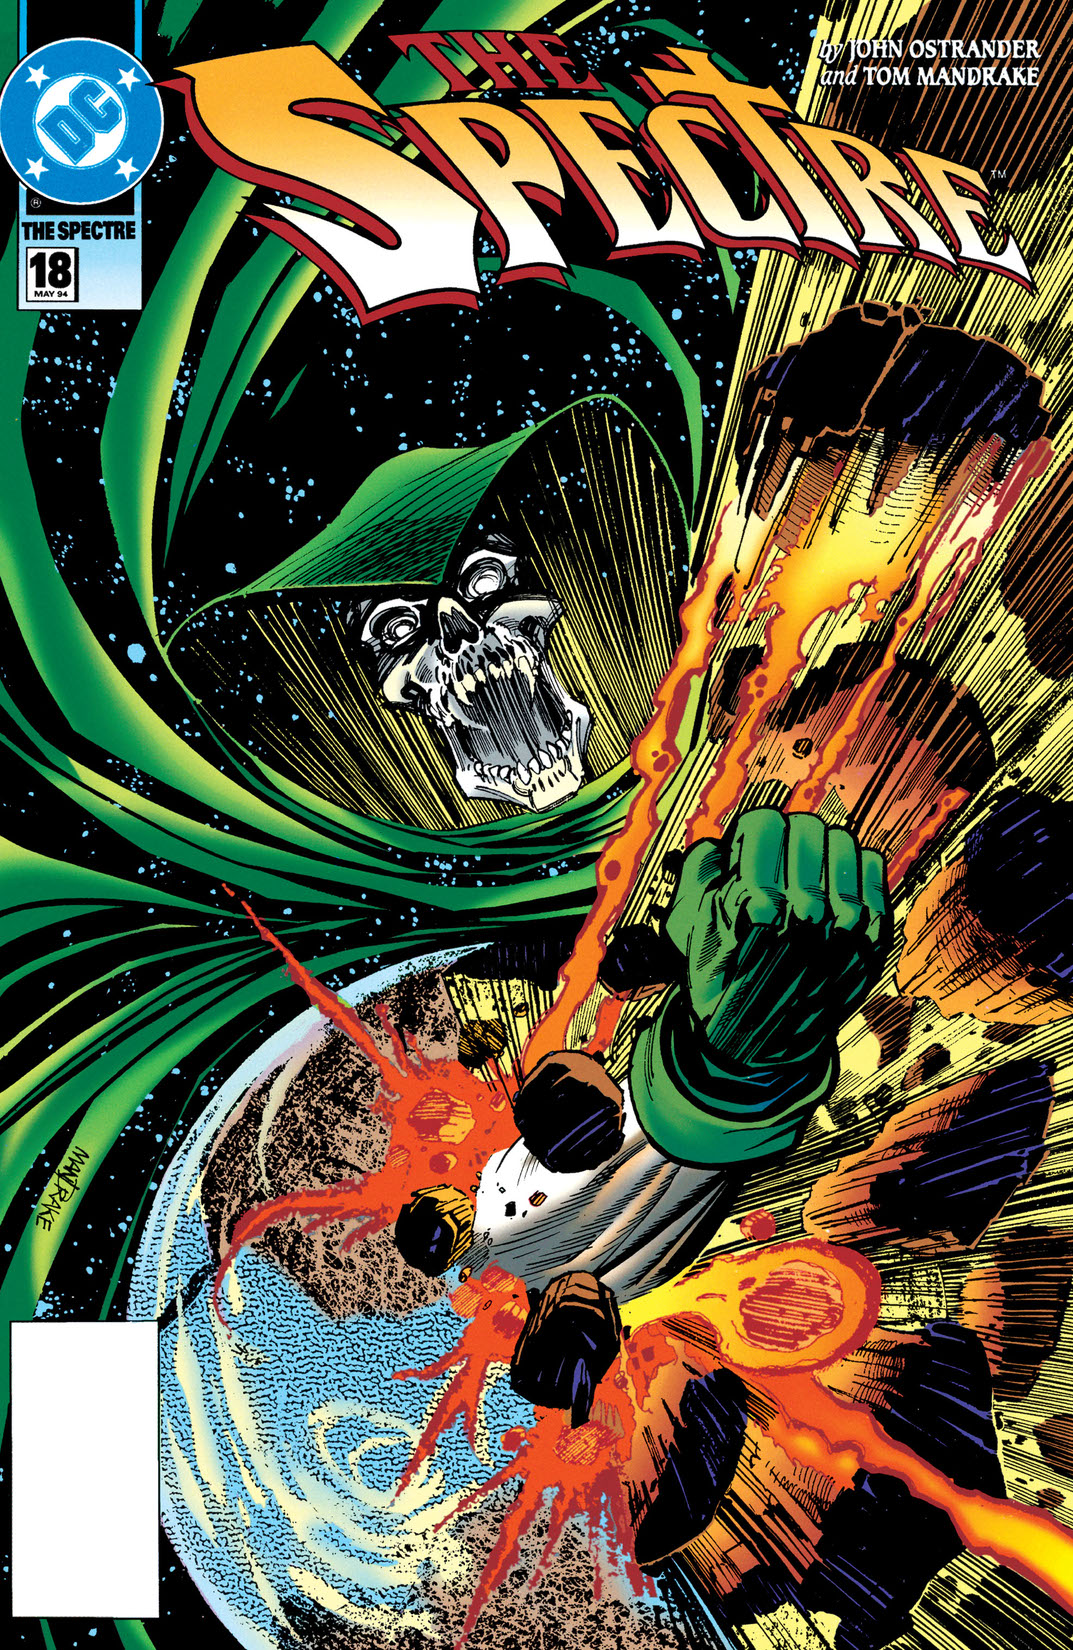 The Spectre (1992-) #18 preview images